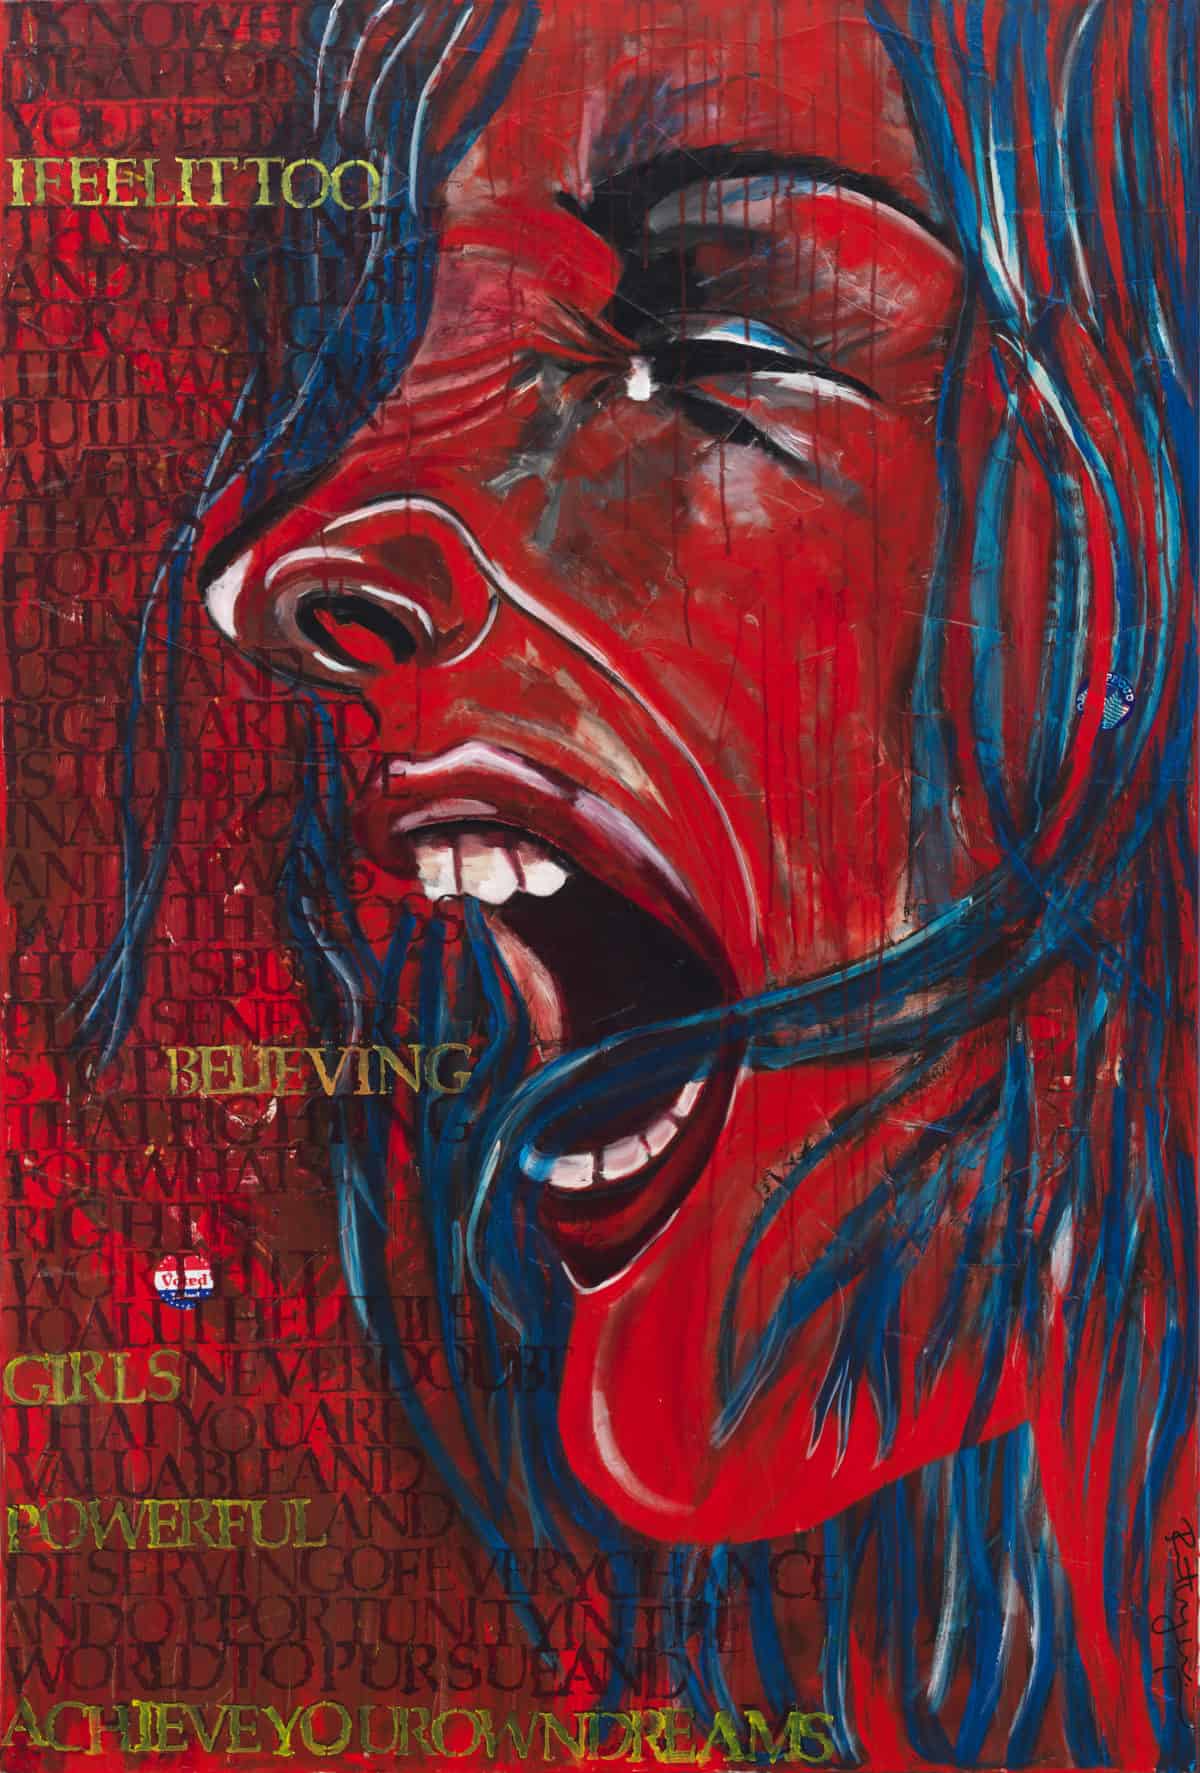 Feeling It - Original Portrait Artwork by Ronit Galazan at RonitGallery